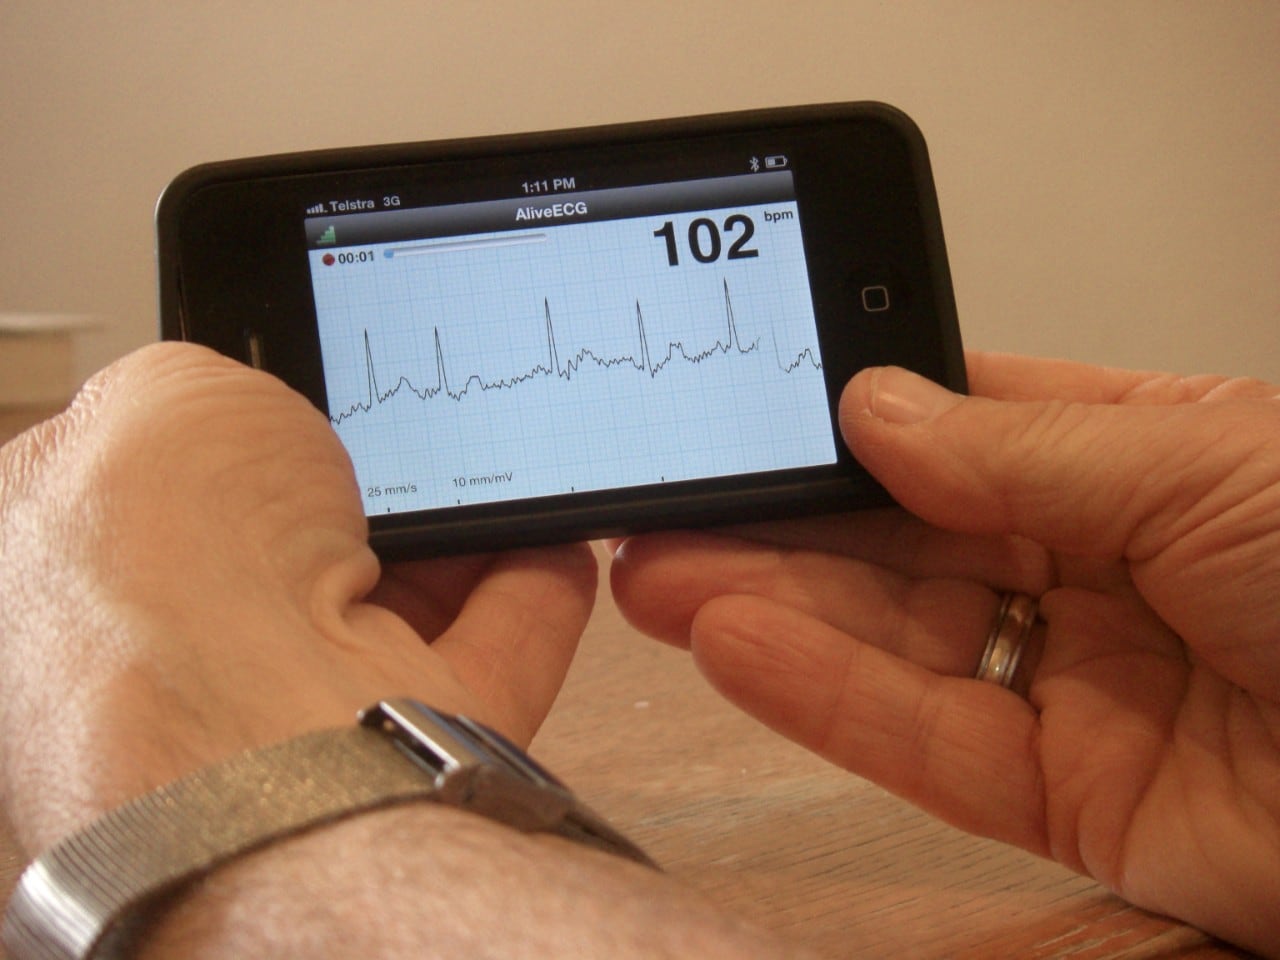 A photo of the AliveCor/Kardia Heart Monitor for smartphone (iECG).